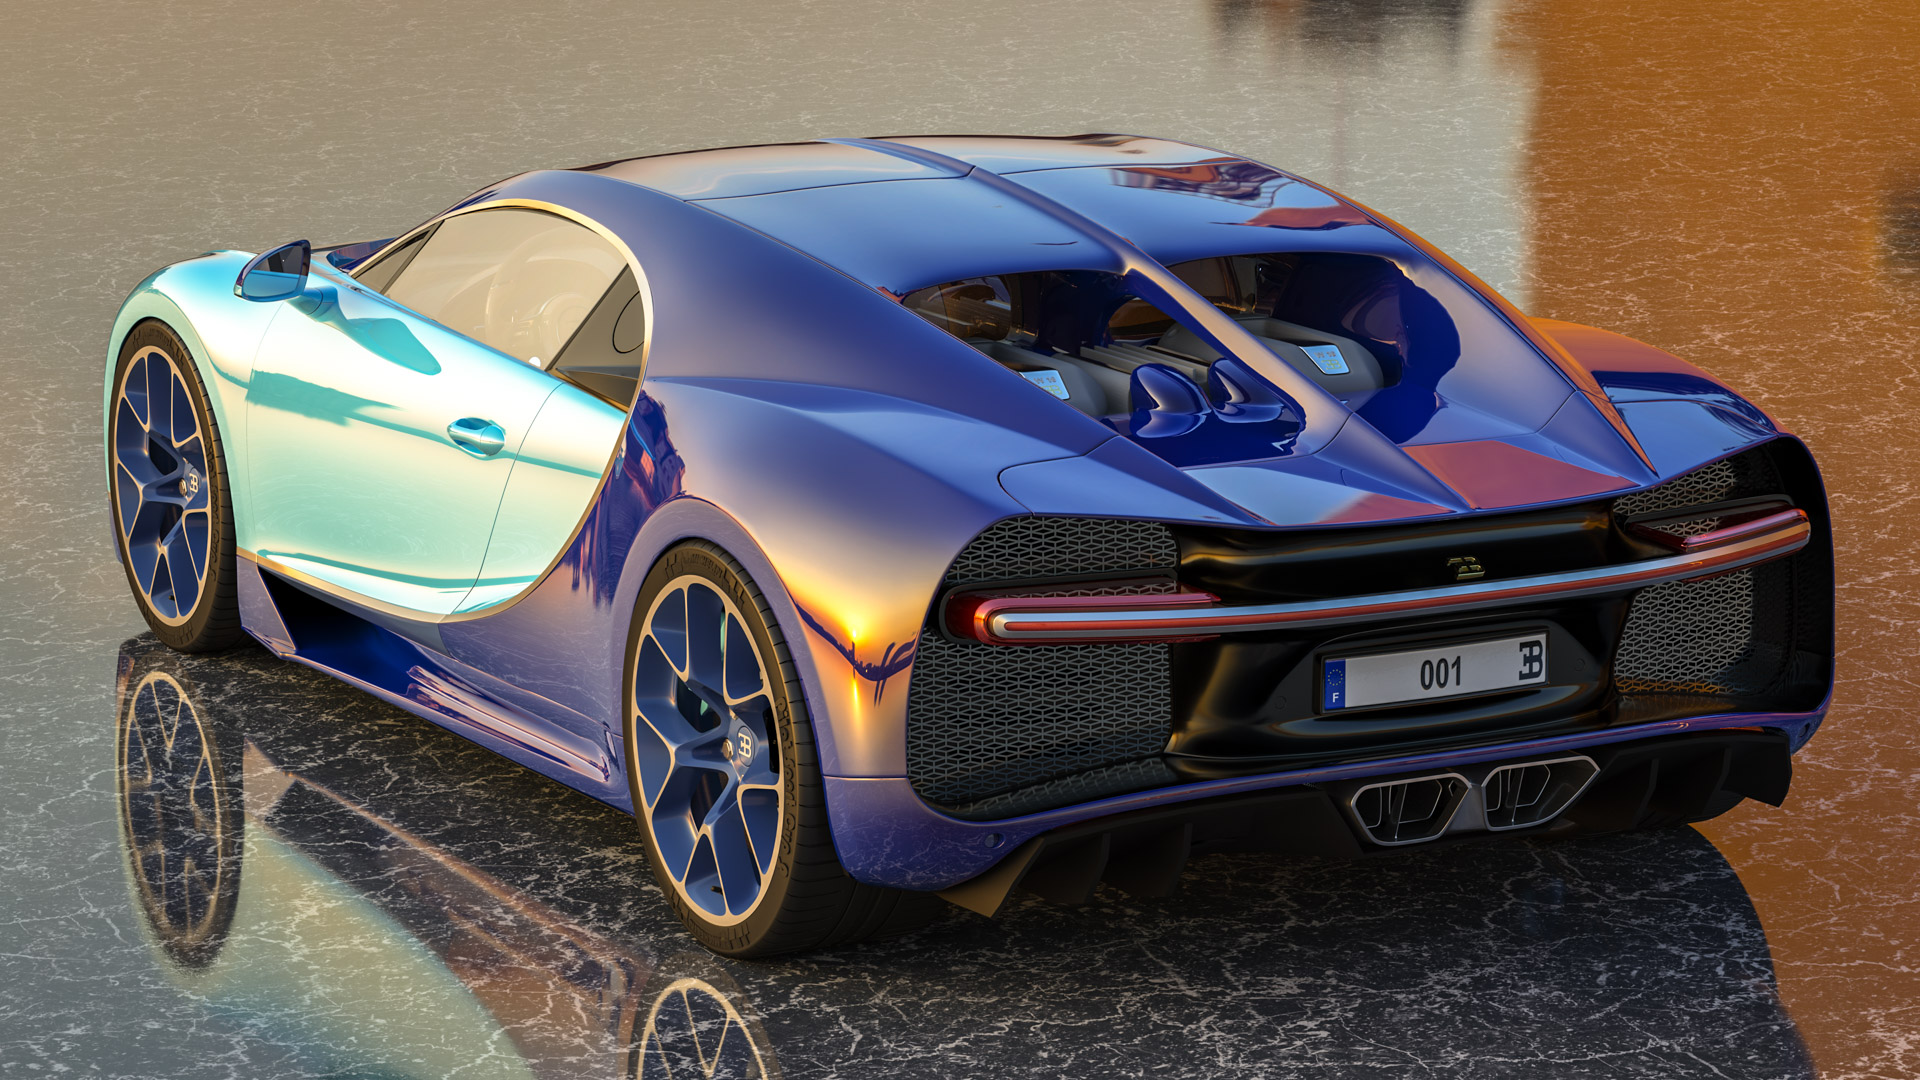 Elevate your visual experience with the Bugatti Chiron in our 1080p car wallpaper, adding a touch of luxury and sophistication to your desktop.